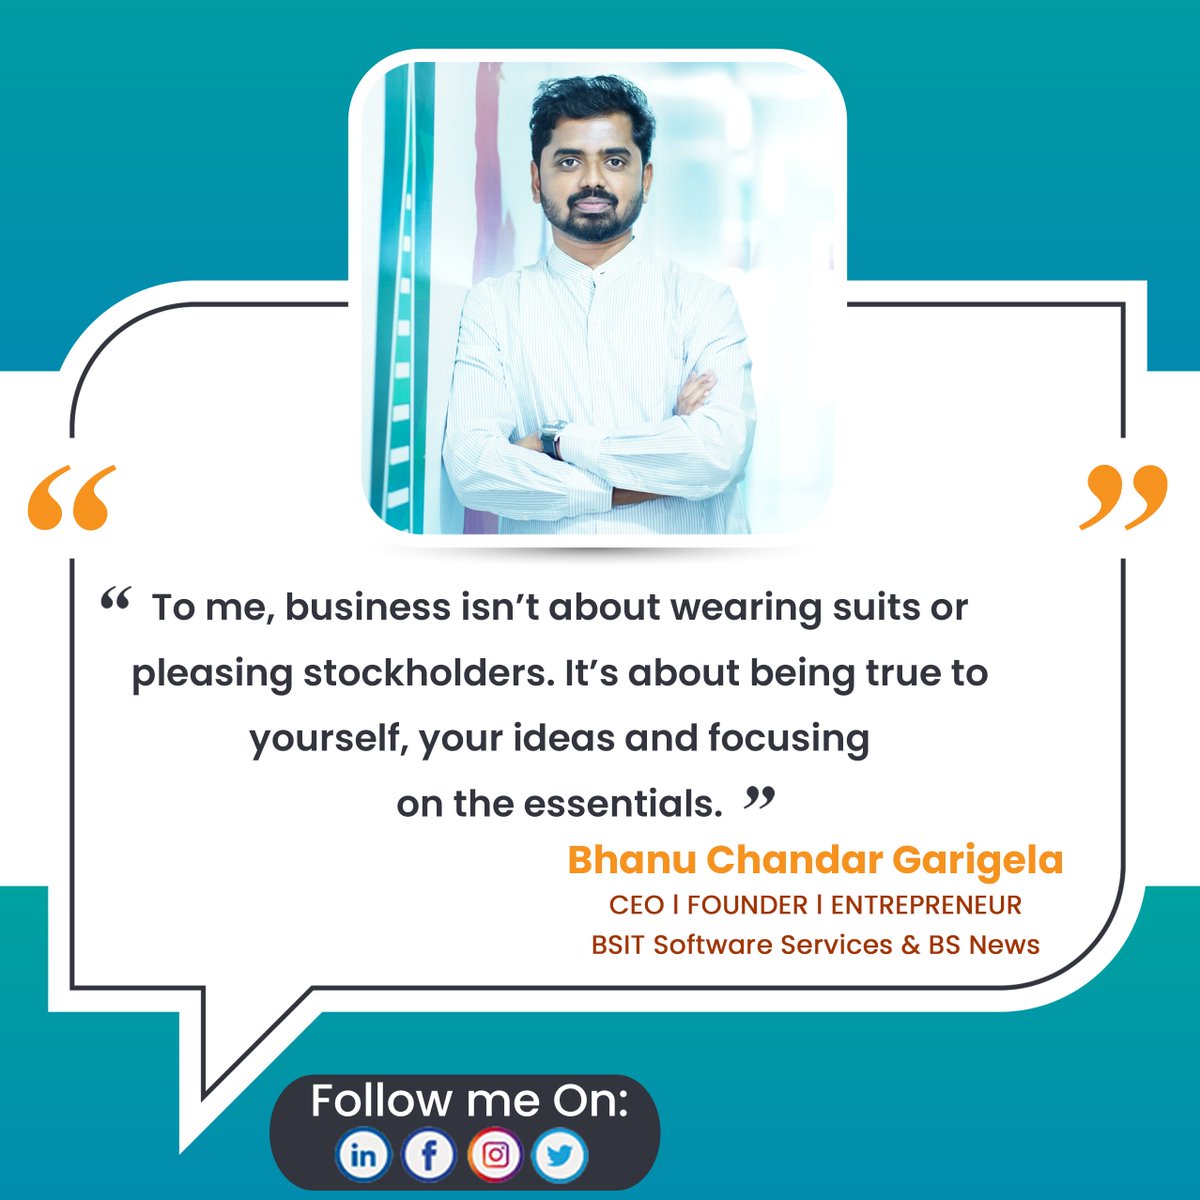 “To me, business isn’t about wearing suits or pleasing stockholders. It’s about being true to yourself, your ideas and focusing on the essentials.”

#bhanuchandargarigela #sharadanenavath  #BSIT #BeAtBSIT #BSITSoftwareServices #India #Qoute #Motivational #Motivation #Motivational